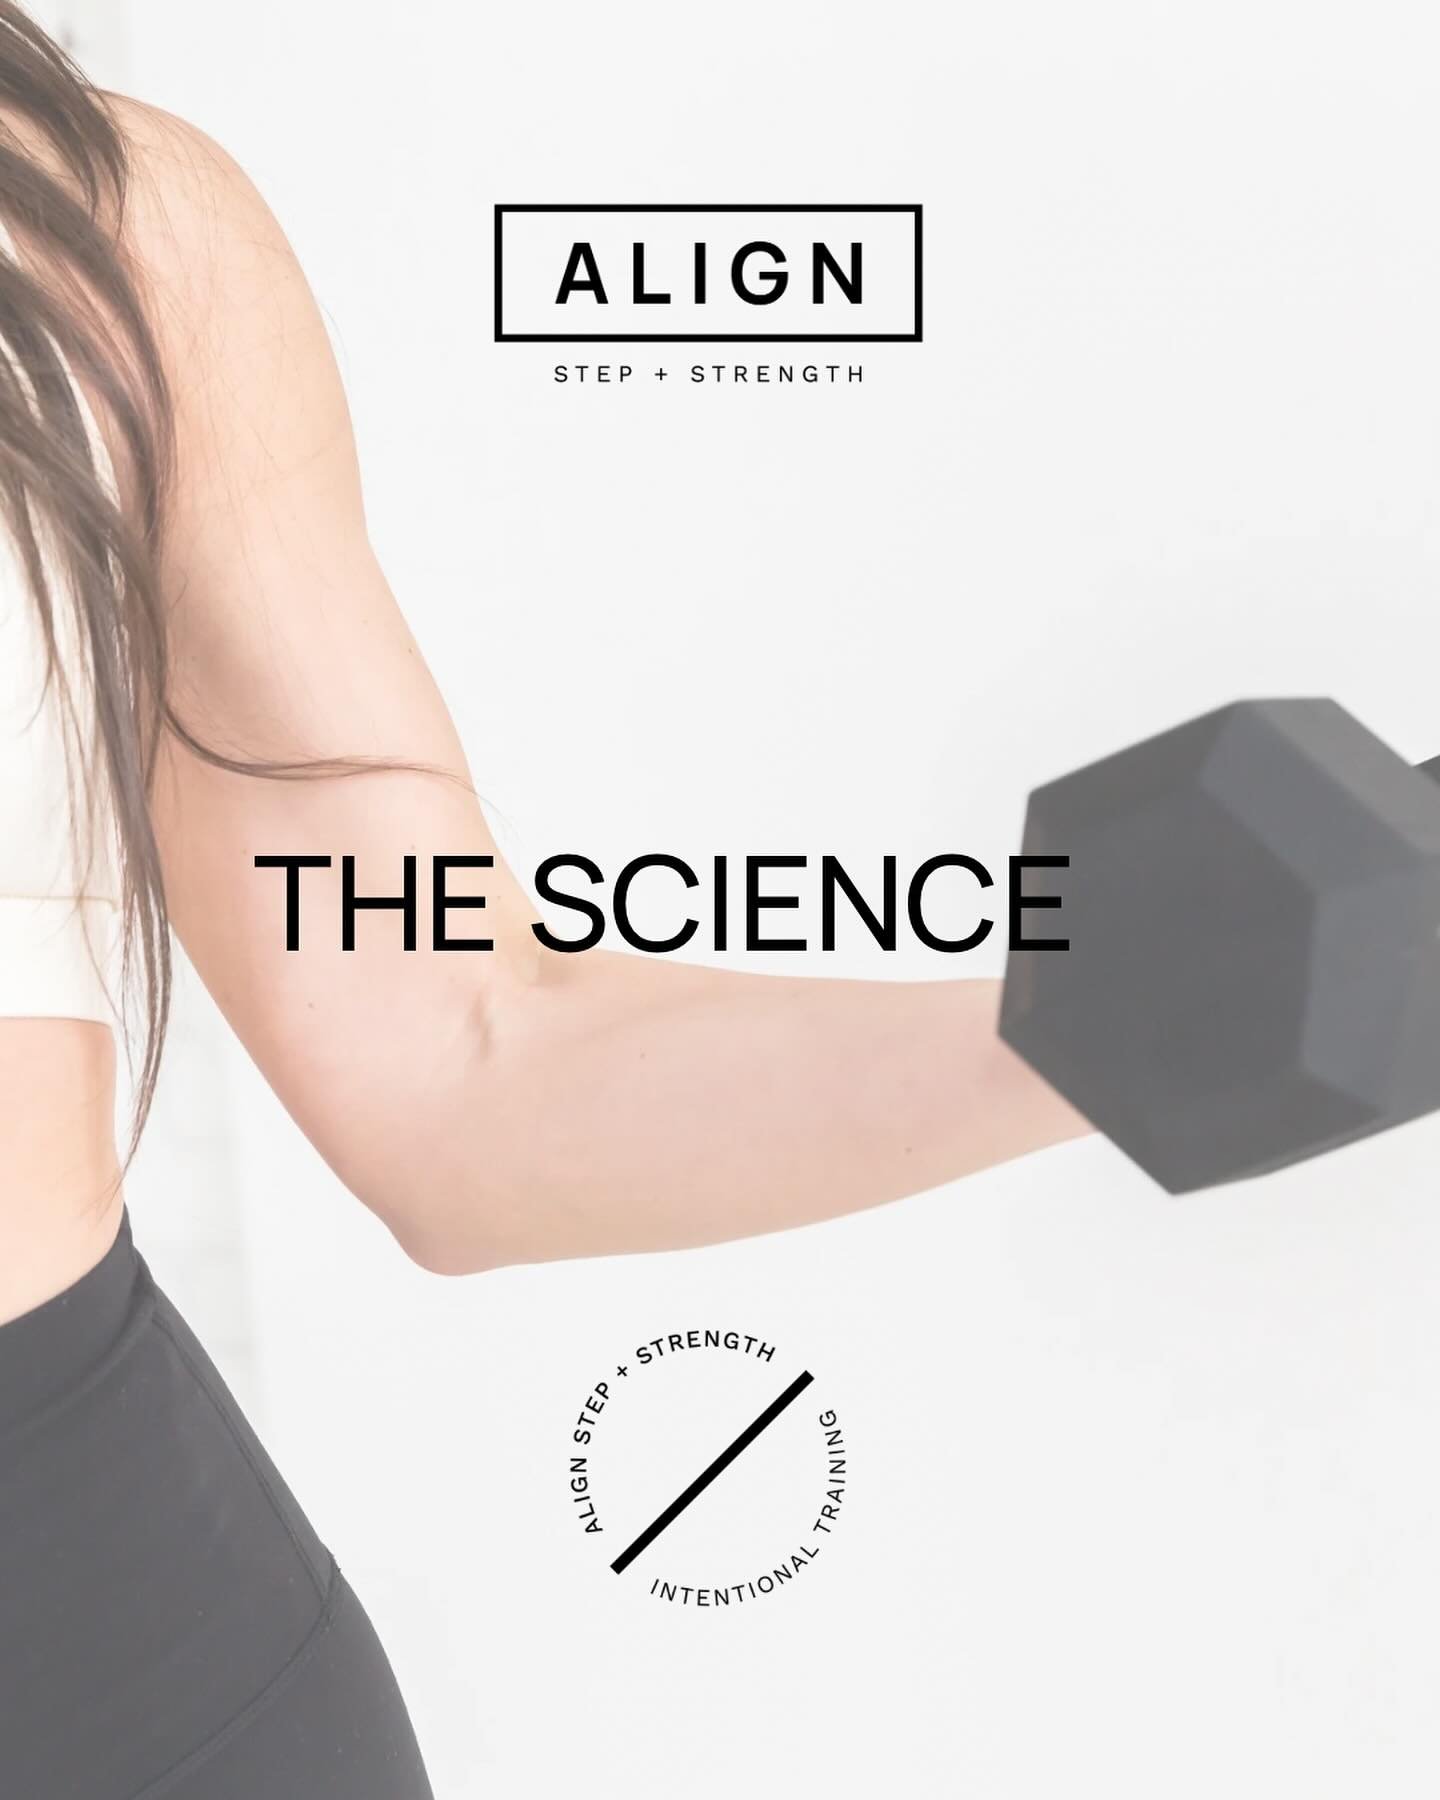 At ALIGN you&rsquo;re not just working out, you&rsquo;re learning THE WHY. Our muscle group focused Step + Strength classes are programmed to give you the most effective workouts, while empowering you to reach your goals. 
We are a Stairmaster and St